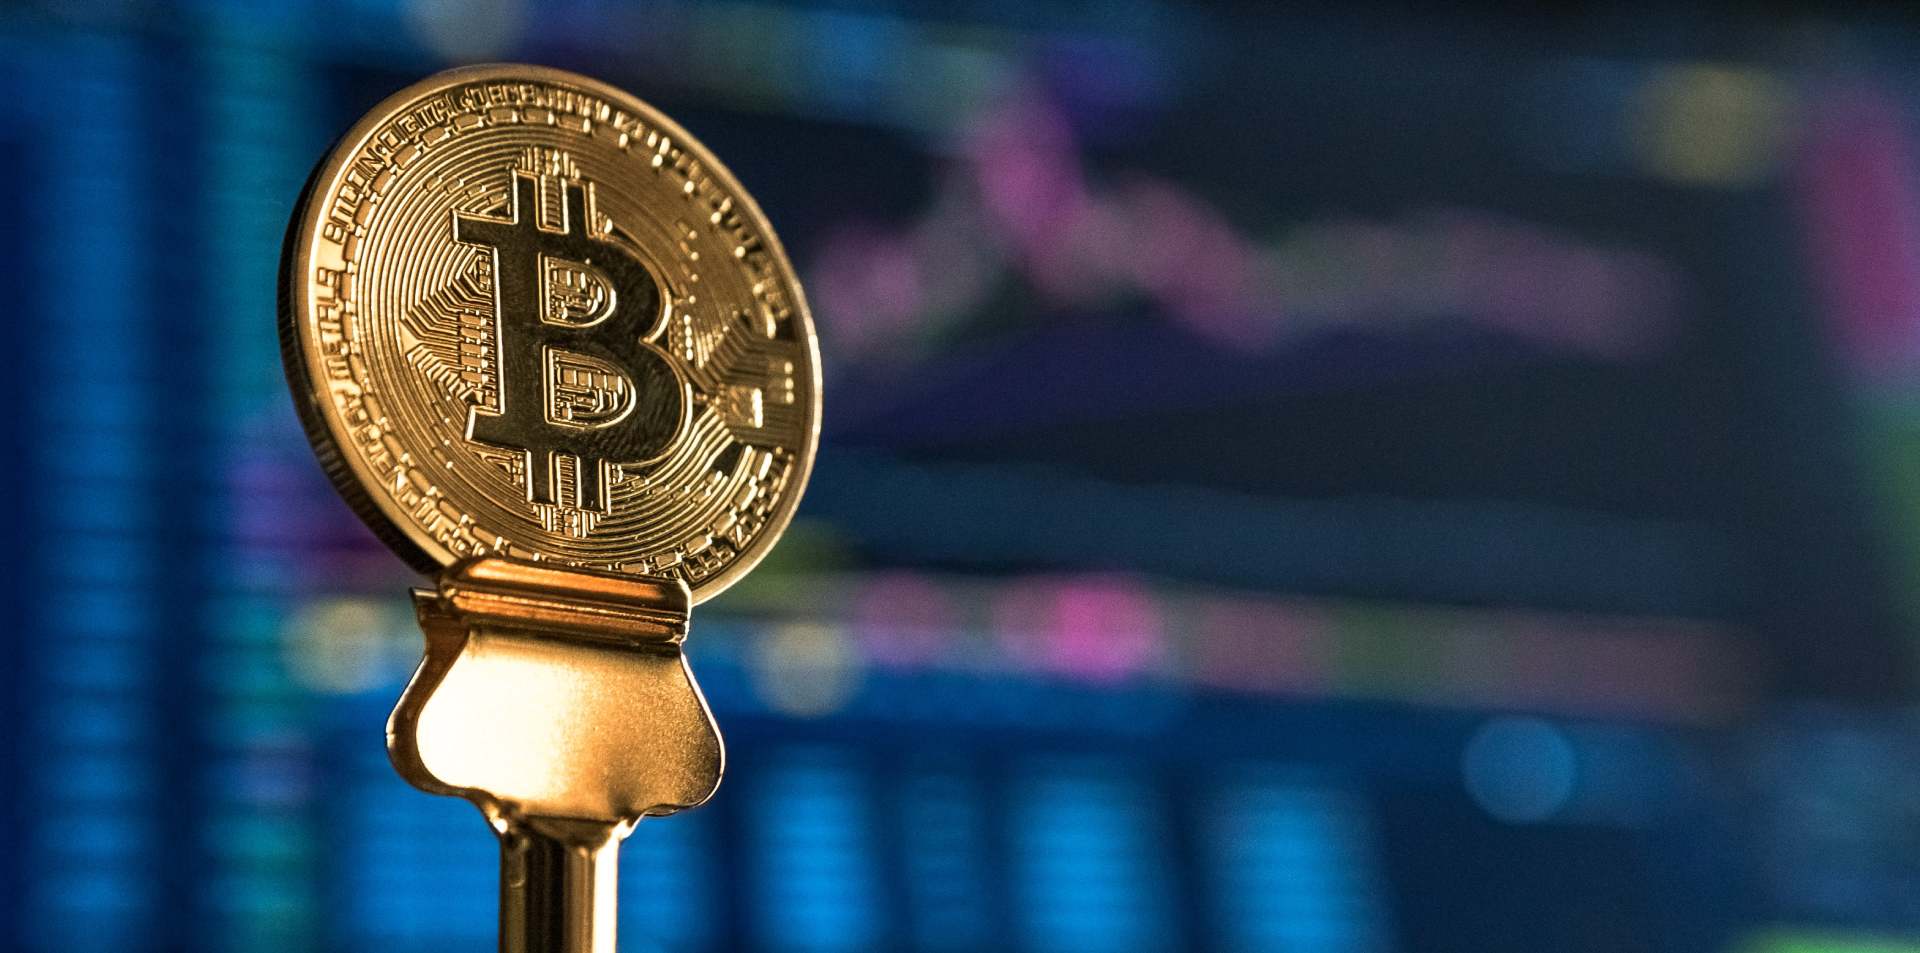 Faith in cyptocurrency - Bitcoin slides 26% since March